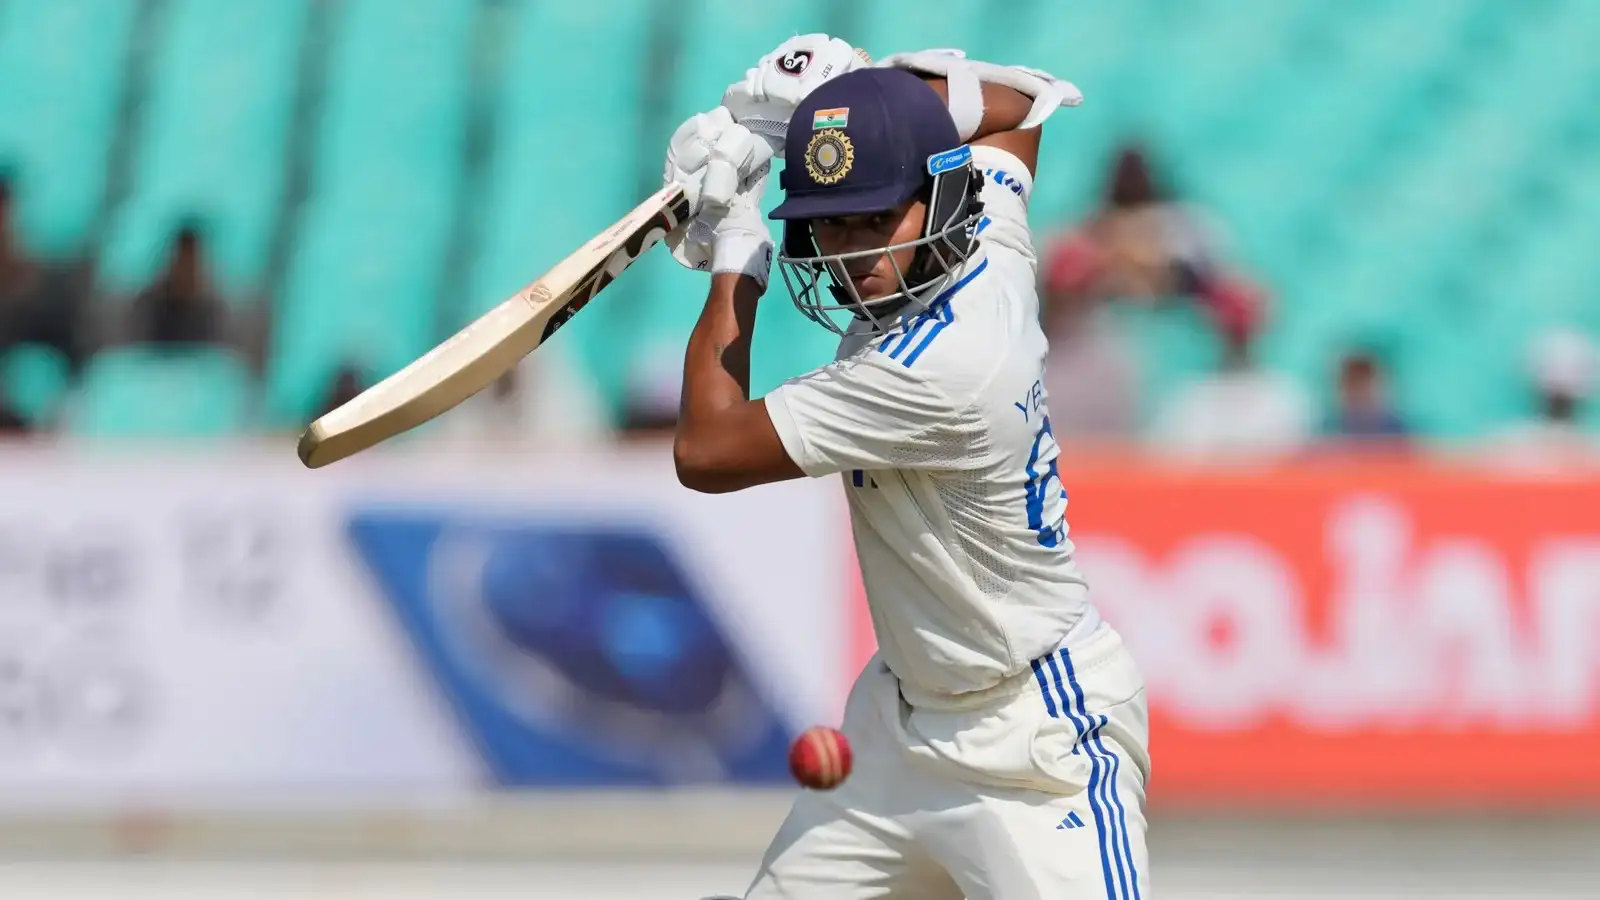 Yashasvi Jaiswal playing a powerful shot in his debut Test match for India against England.